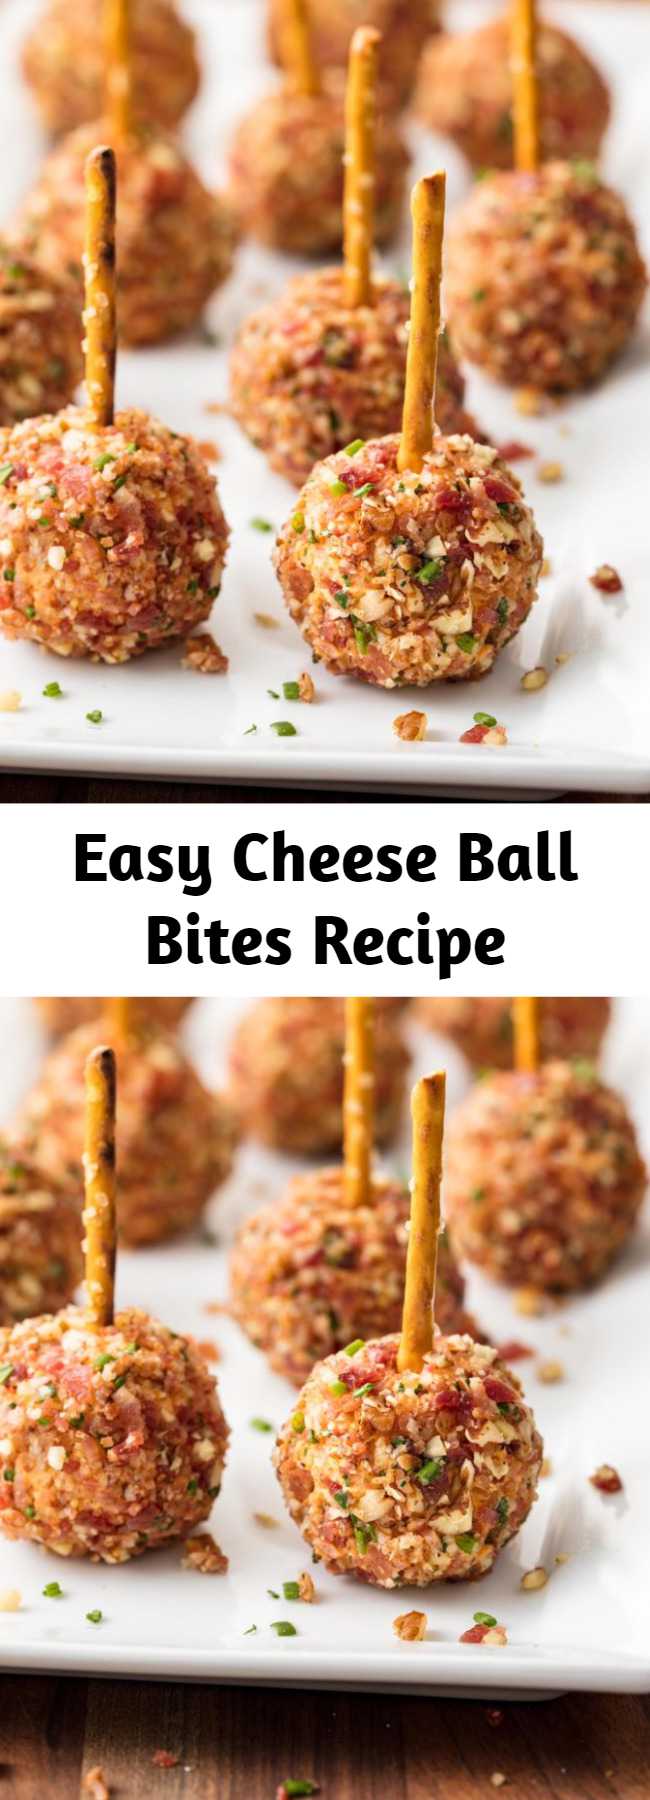 Easy Cheese Ball Bites Recipe - These Cheese Ball Bites are the easy, no-stress, Thanksgiving, Christmas, holiday appetizer that everyone will be talking about for YEARS. #thanksgiving #christmas #holidays #superbowl #appetizers #nobake #cheese #cheeseball #bites #bacon #creamcheese #pretzels #mini #easy #recipe #fingerfoods #snacks #mini #keto